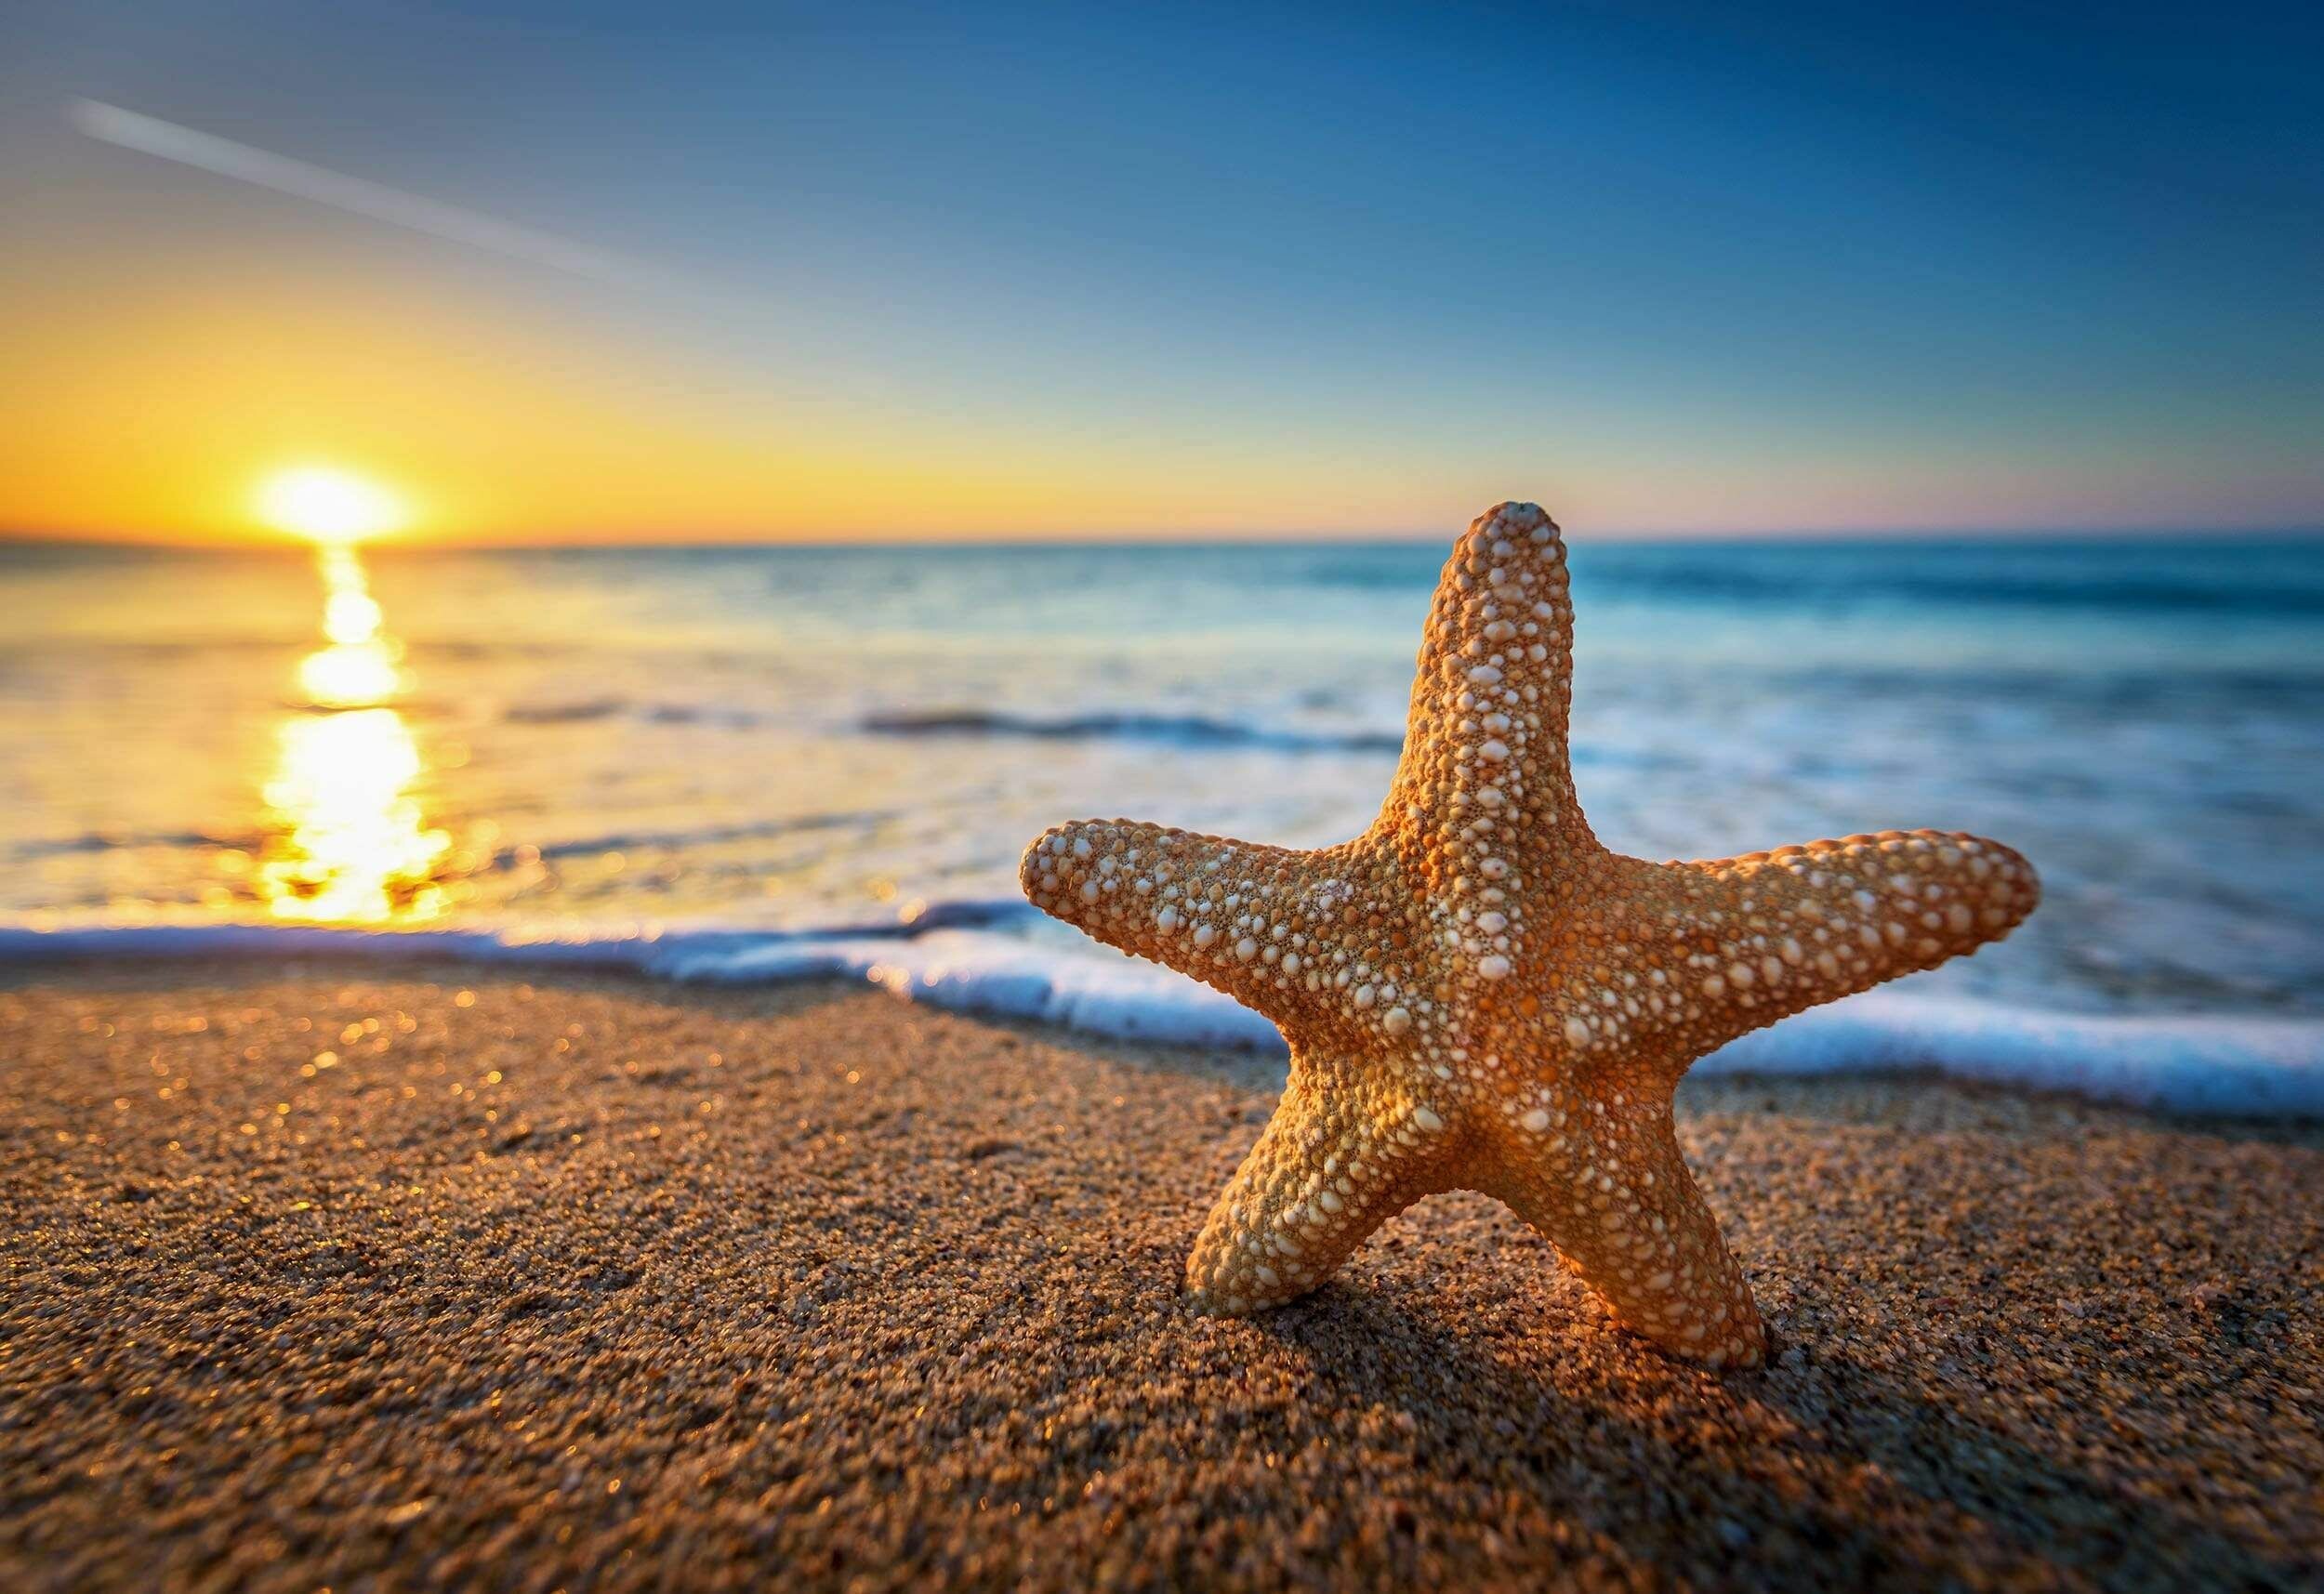 Starfish: Starfish on beach with sunset 4K - Best of Wallpapers for Andriod and ios. 2500x1720 HD Wallpaper.